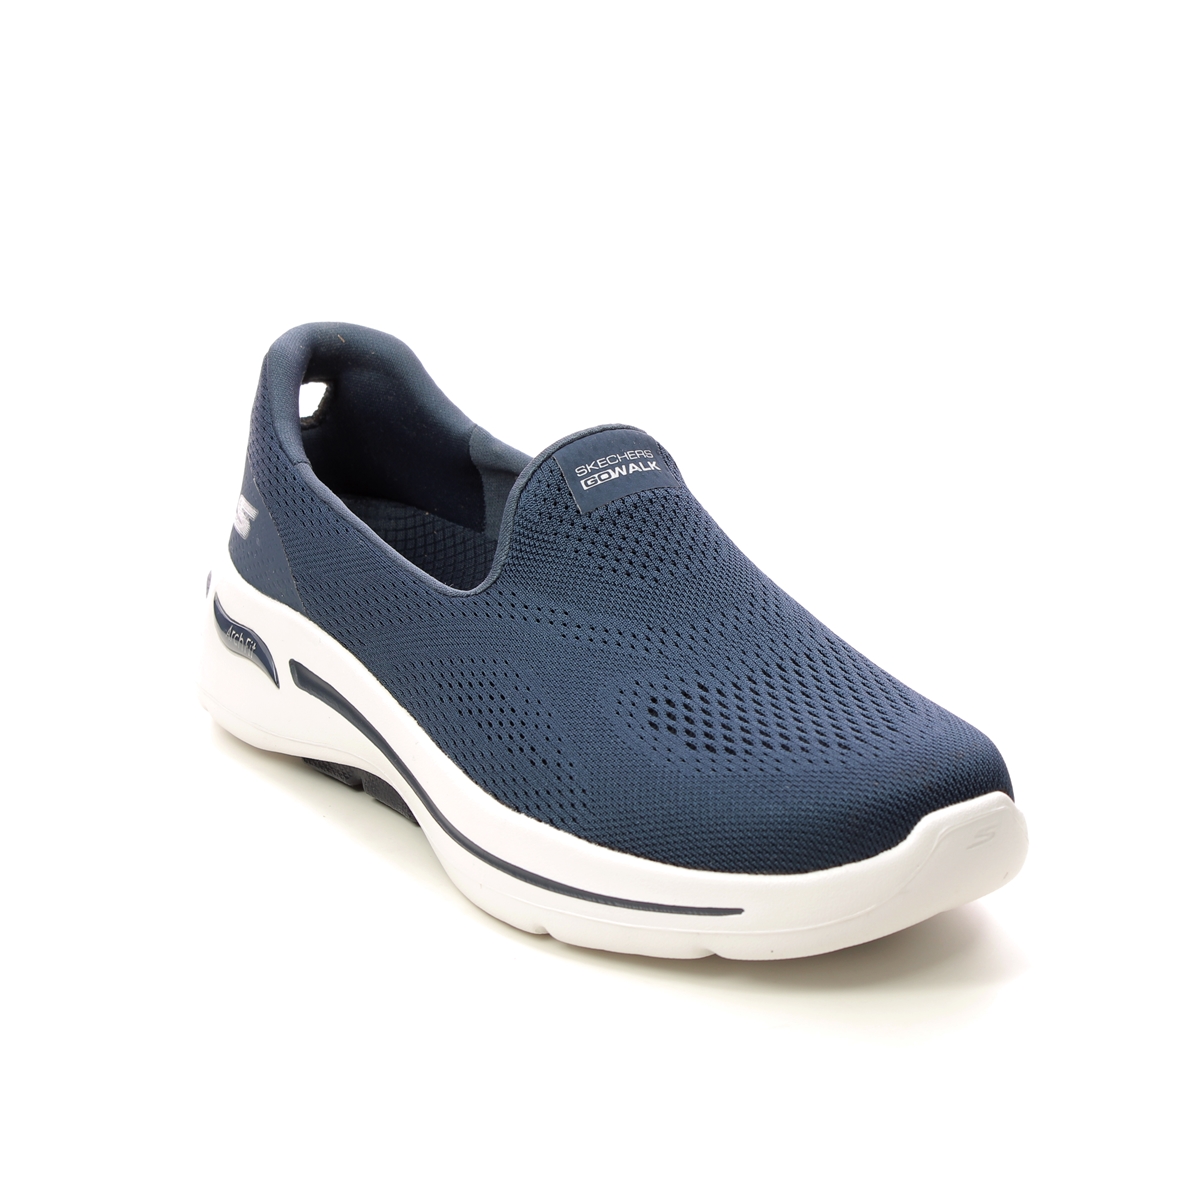 Skechers Arch Fit Go Walk Slip On NVY Navy Womens trainers 124483